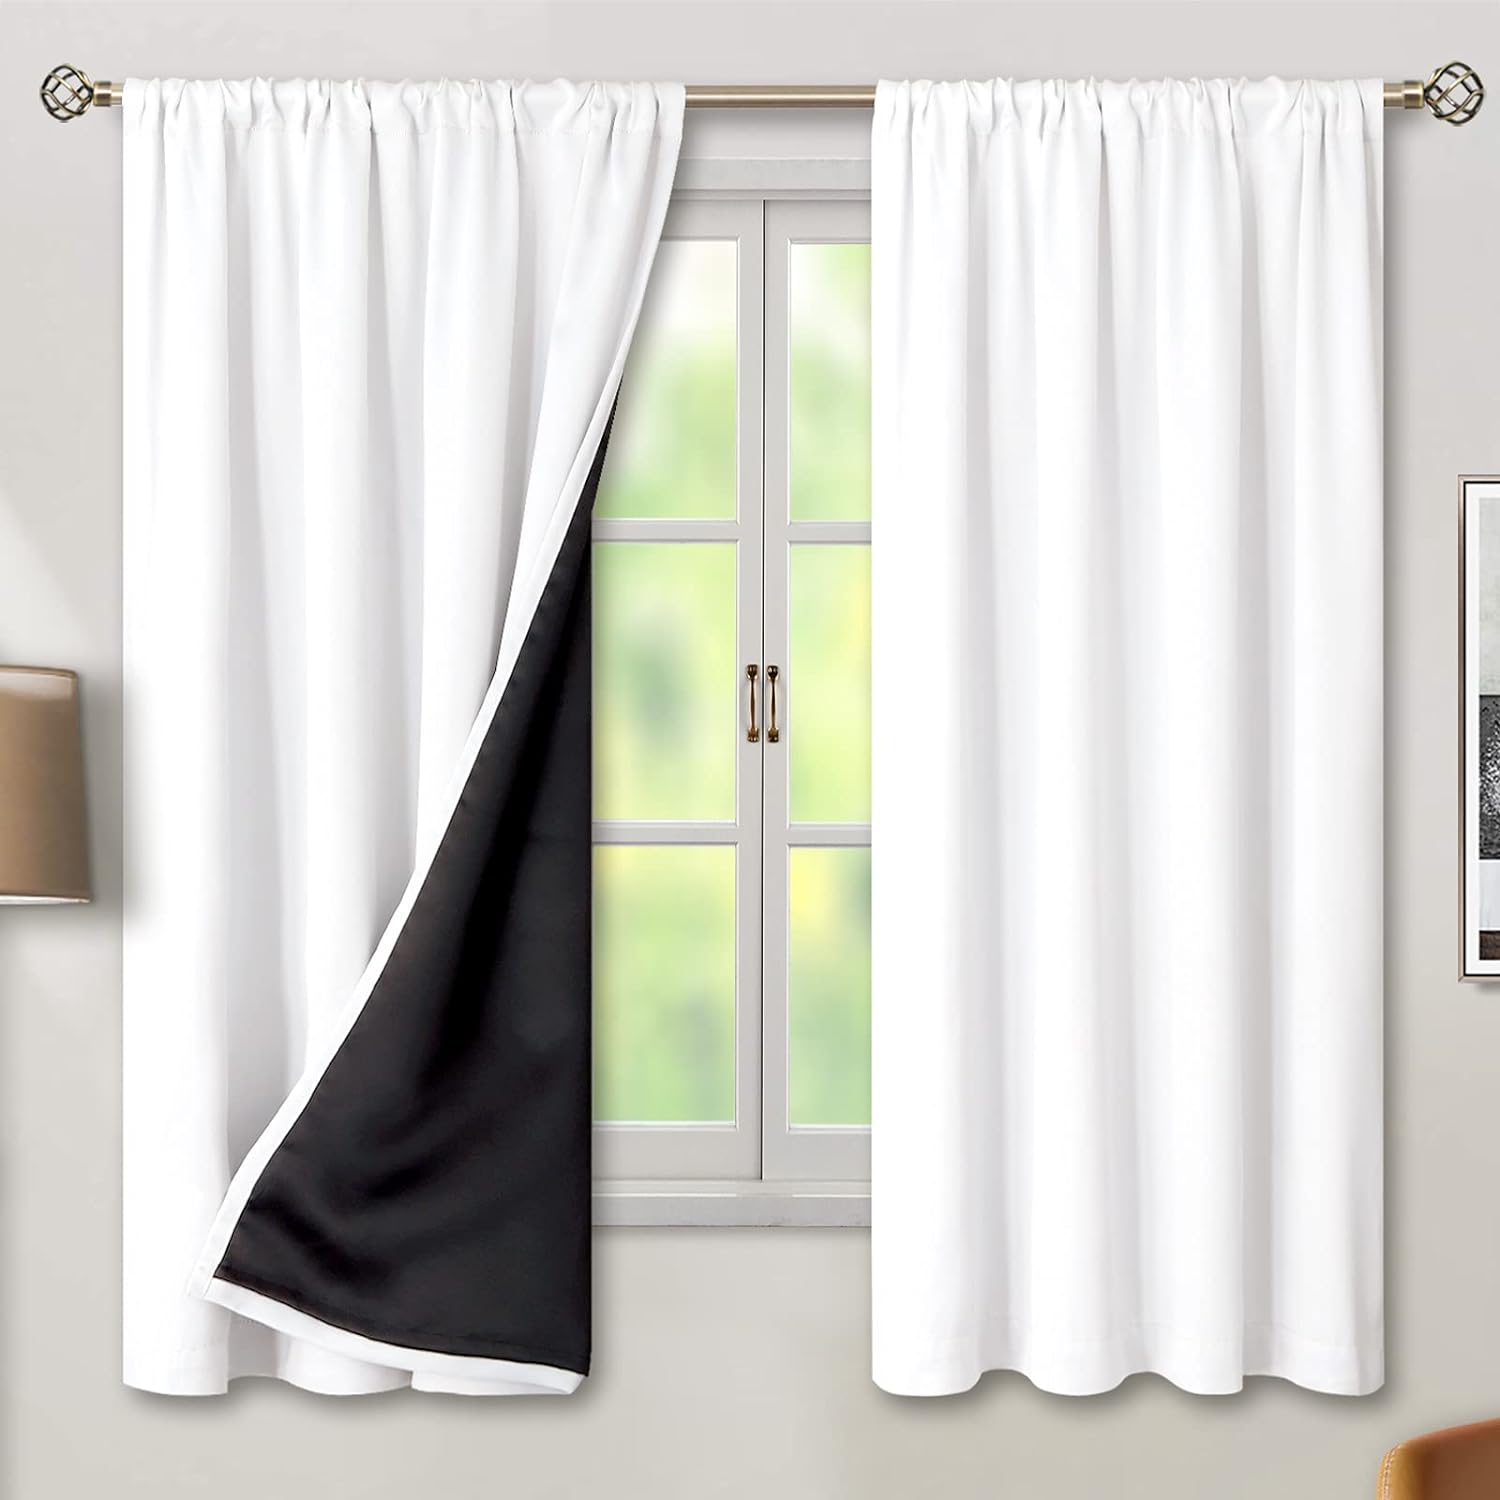 BGment Thermal Insulated 100% Blackout Curtains for Bedroom with Black Liner 42 x 45 Inch, Navy Blue, 2 Panels Double Layer Full Room Darkening Noise Reducing Grommet Curtain